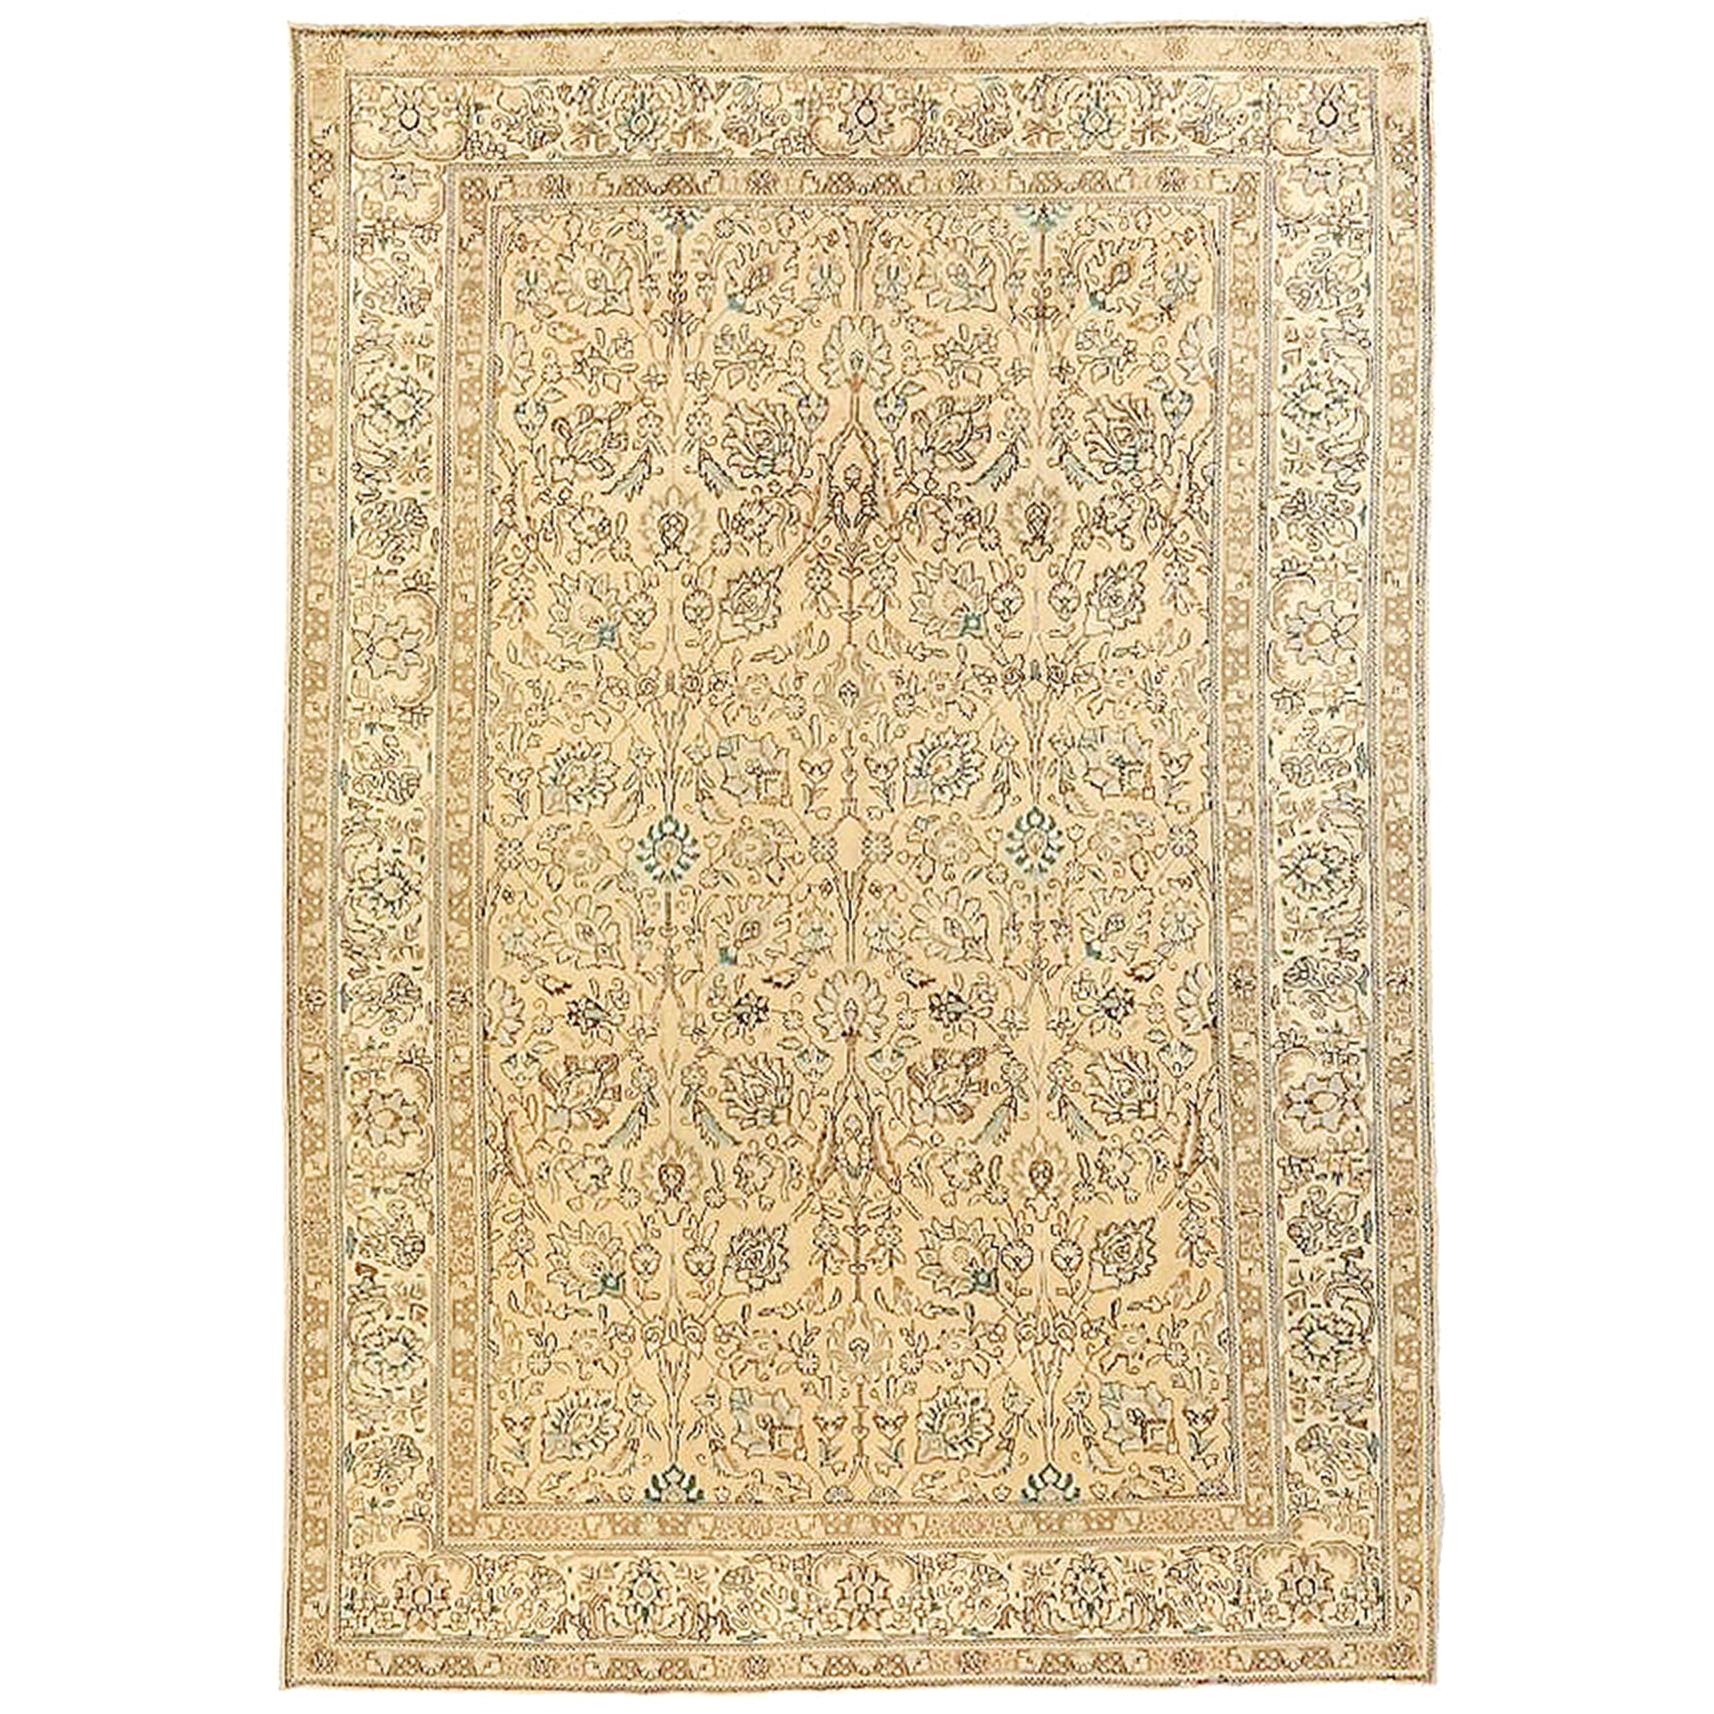 Antique Persian Tabriz Rug with Black and Green Floral Details on Beige Field For Sale